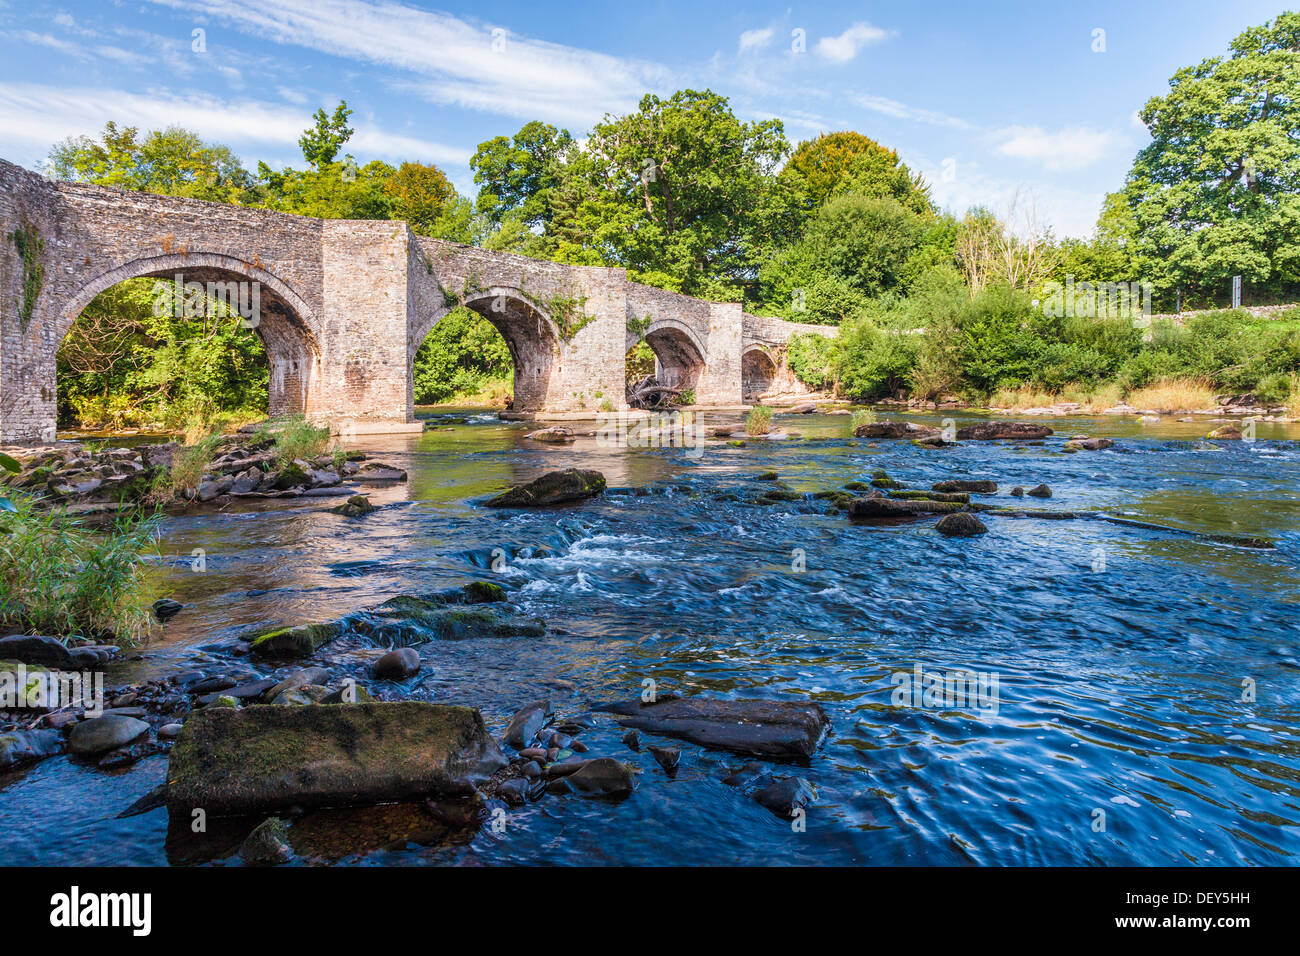 The River Usk and Llangynidr Bridge in the Brecon Beacons National Park, Wales. Stock Photo